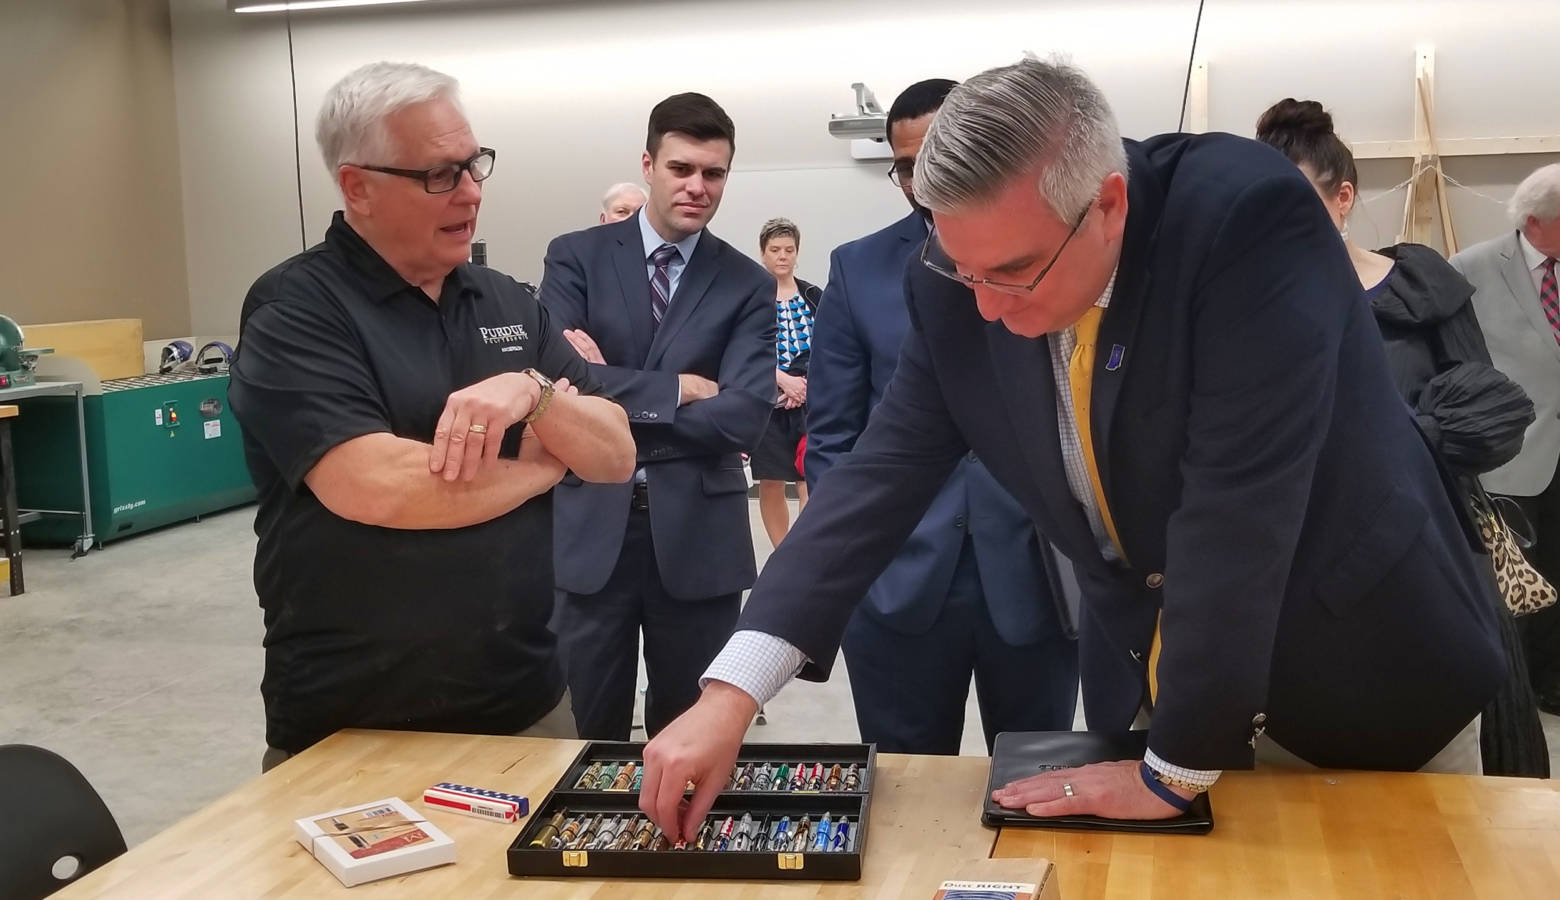 Gov. Eric Holcomb examines pens made by a teacher at the Purdue Polytechnic Institute in Anderson. (Samantha Horton/IPB News)